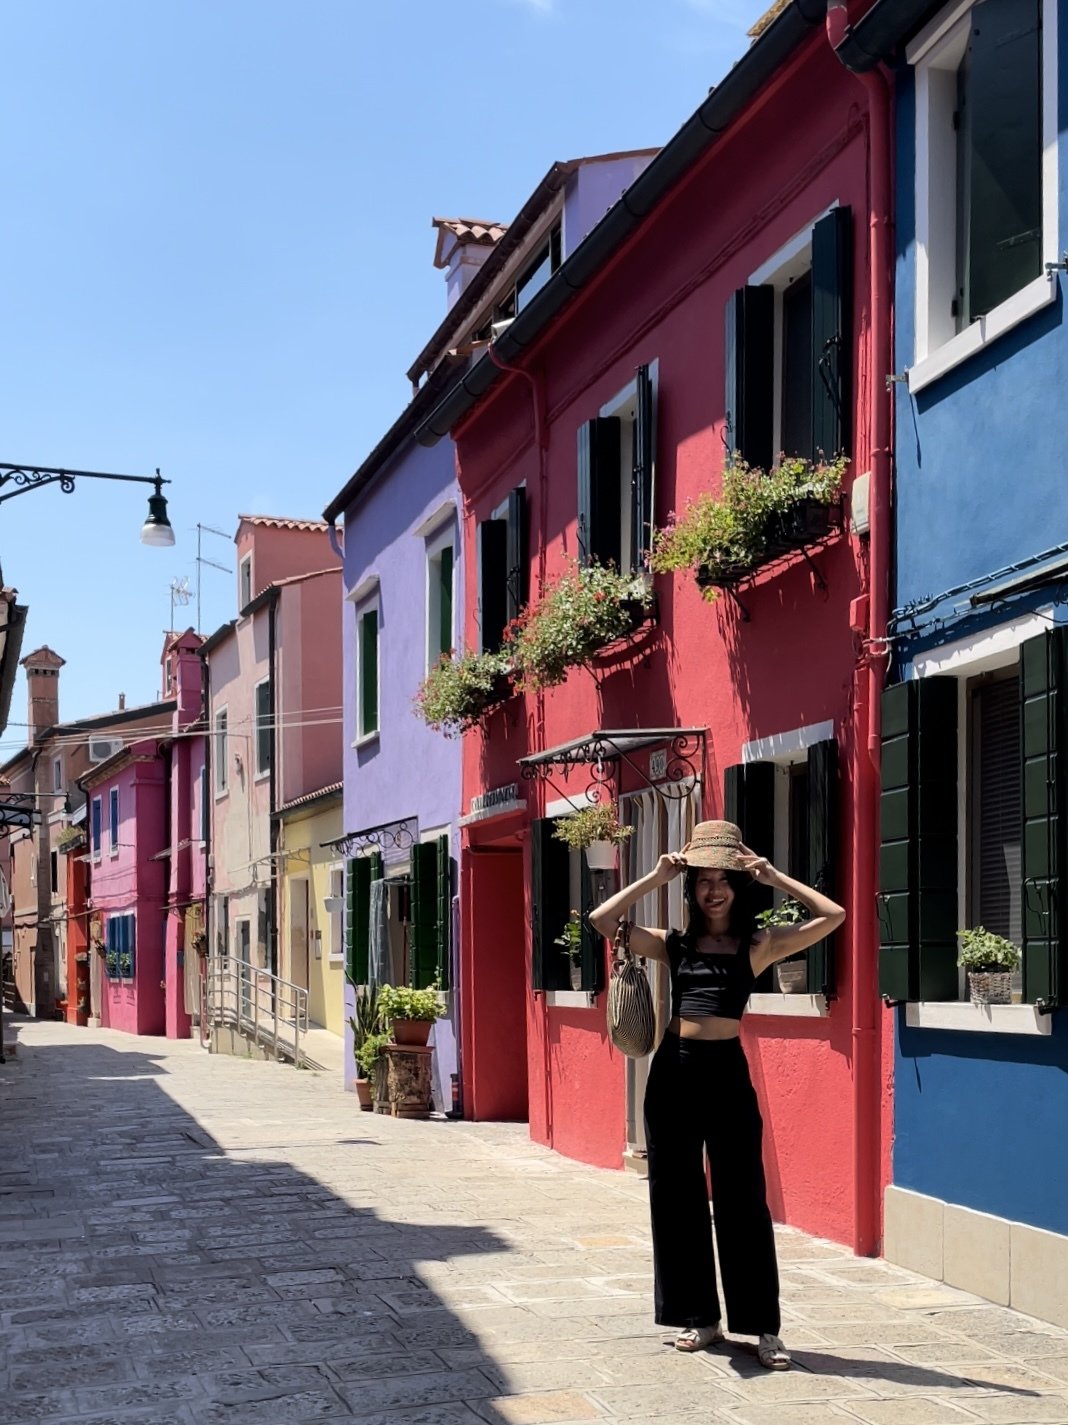 Burano & Murano Islands: Do You Genuinely Have to have A Guided Tour?